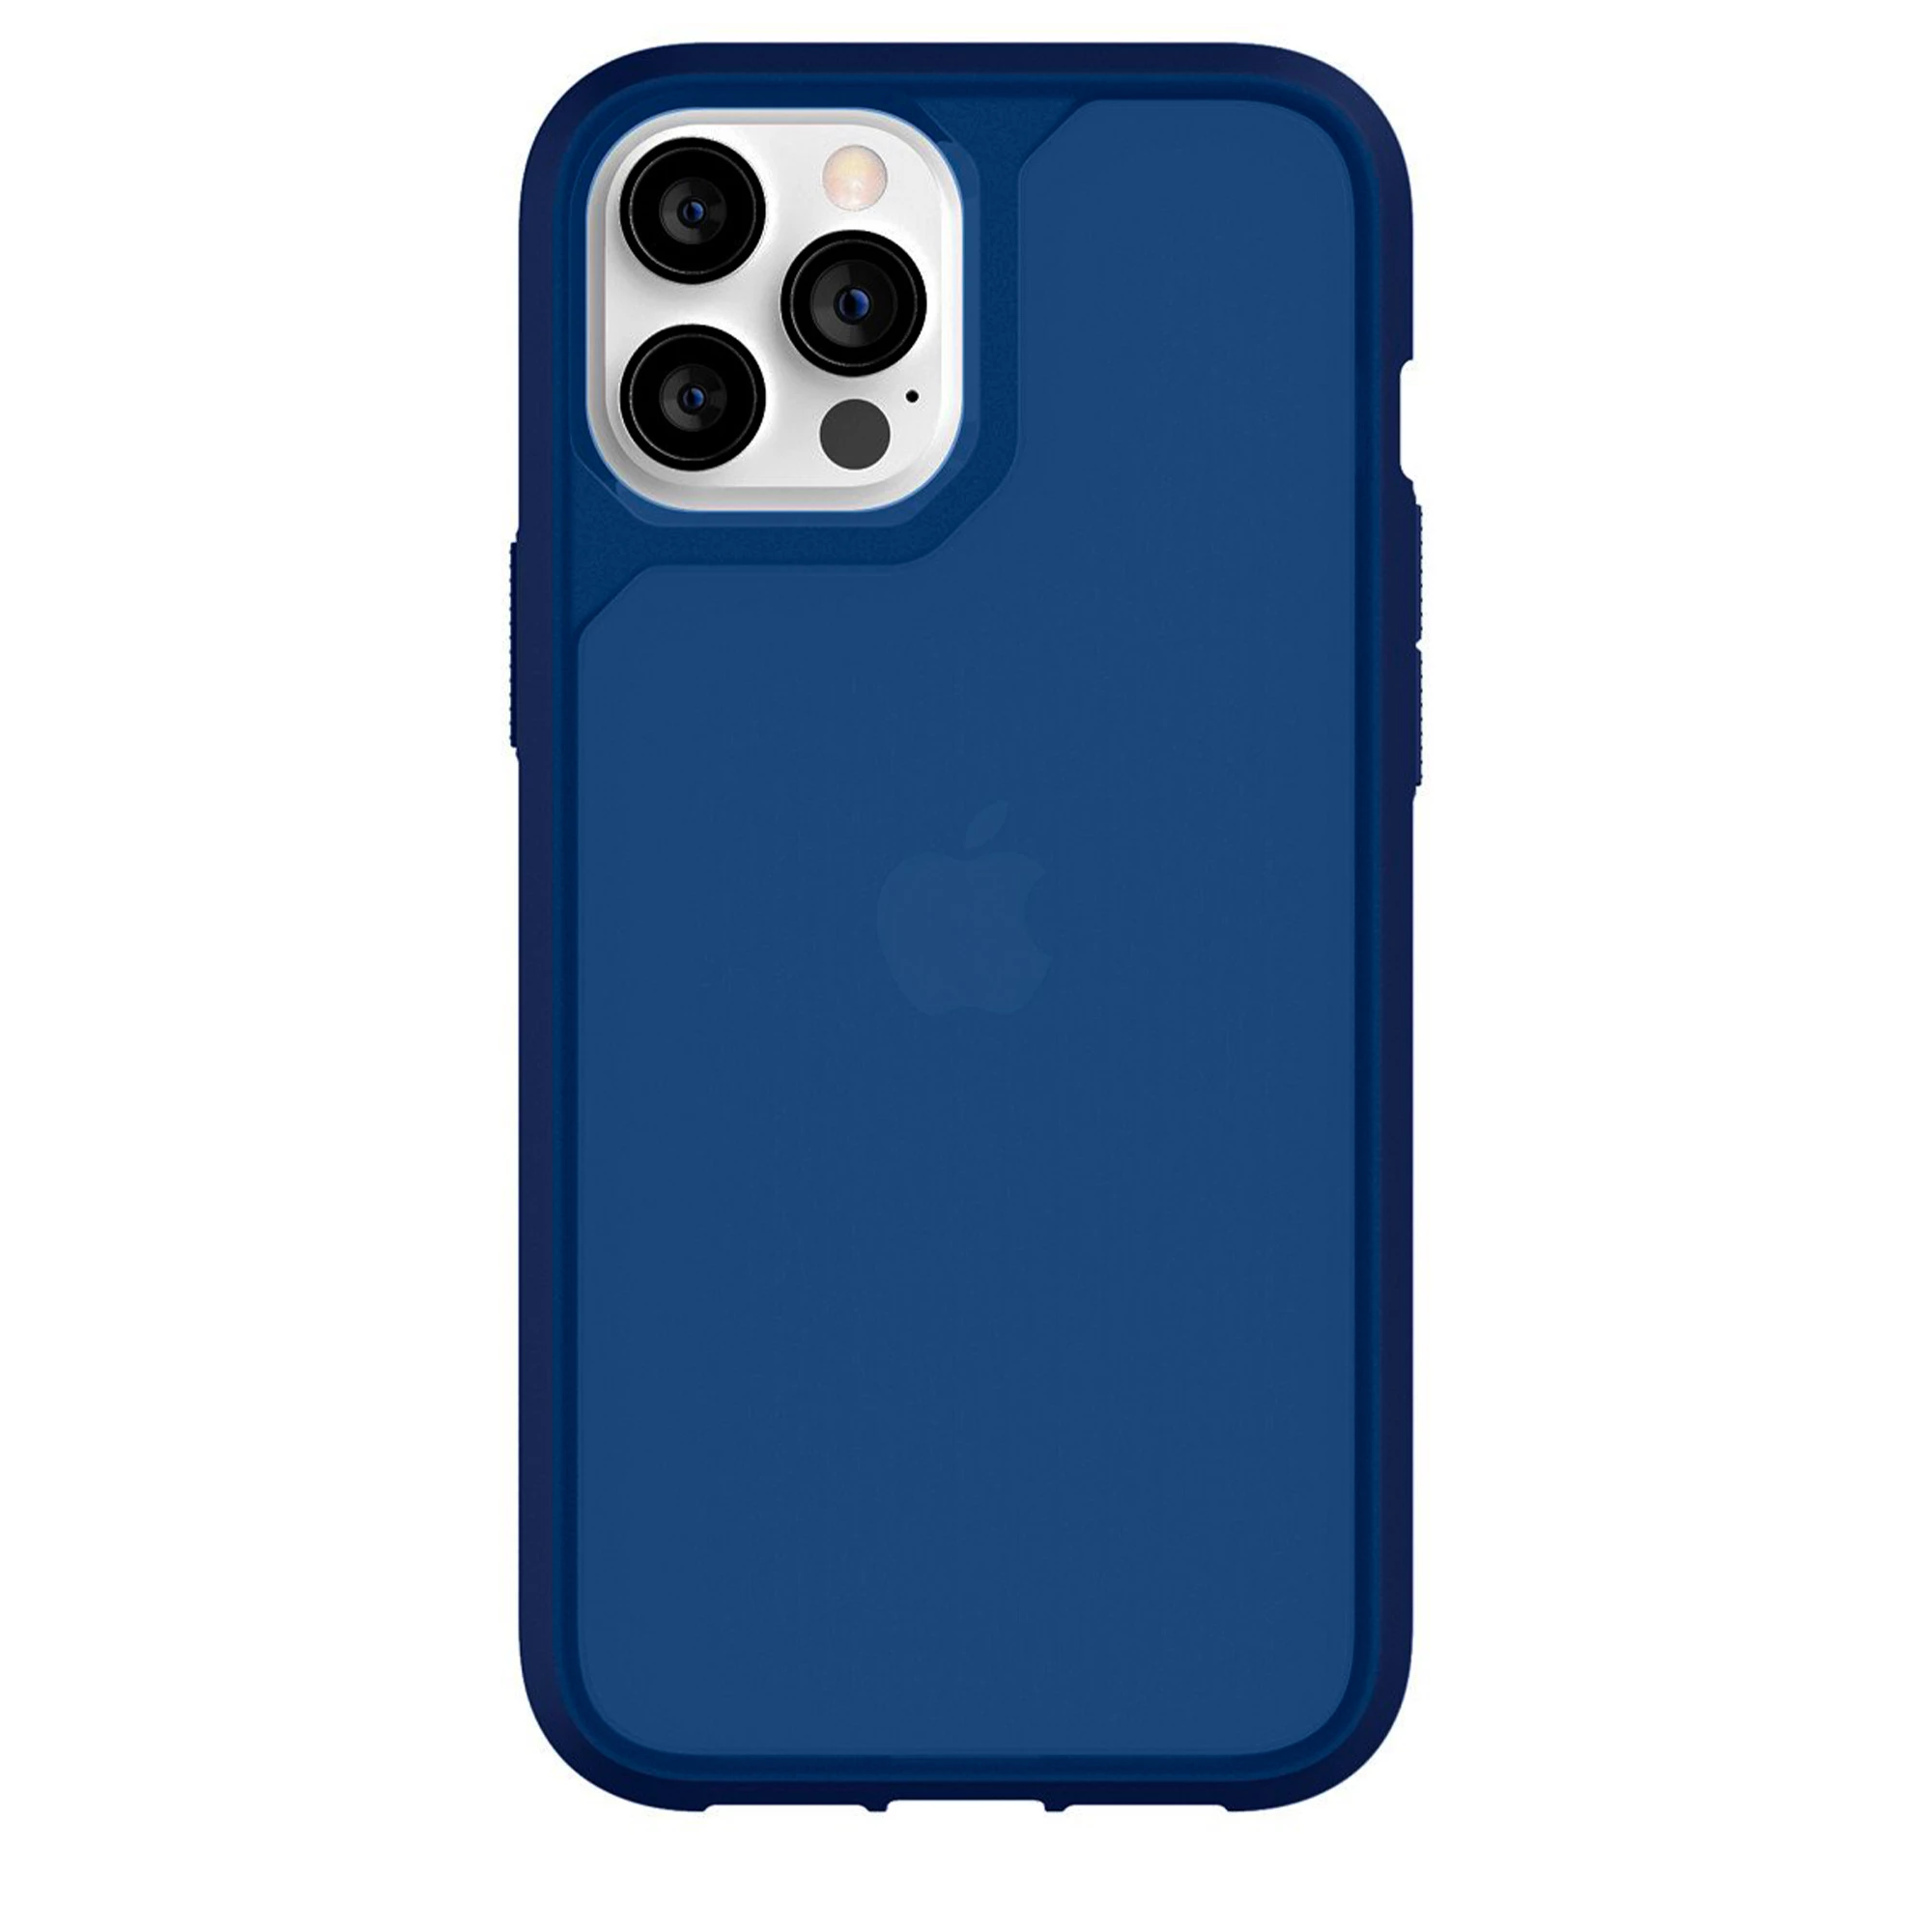 Griffin Survivor Strong for iPhone 12 Pro Max - Navy (GIP-053-NVY)